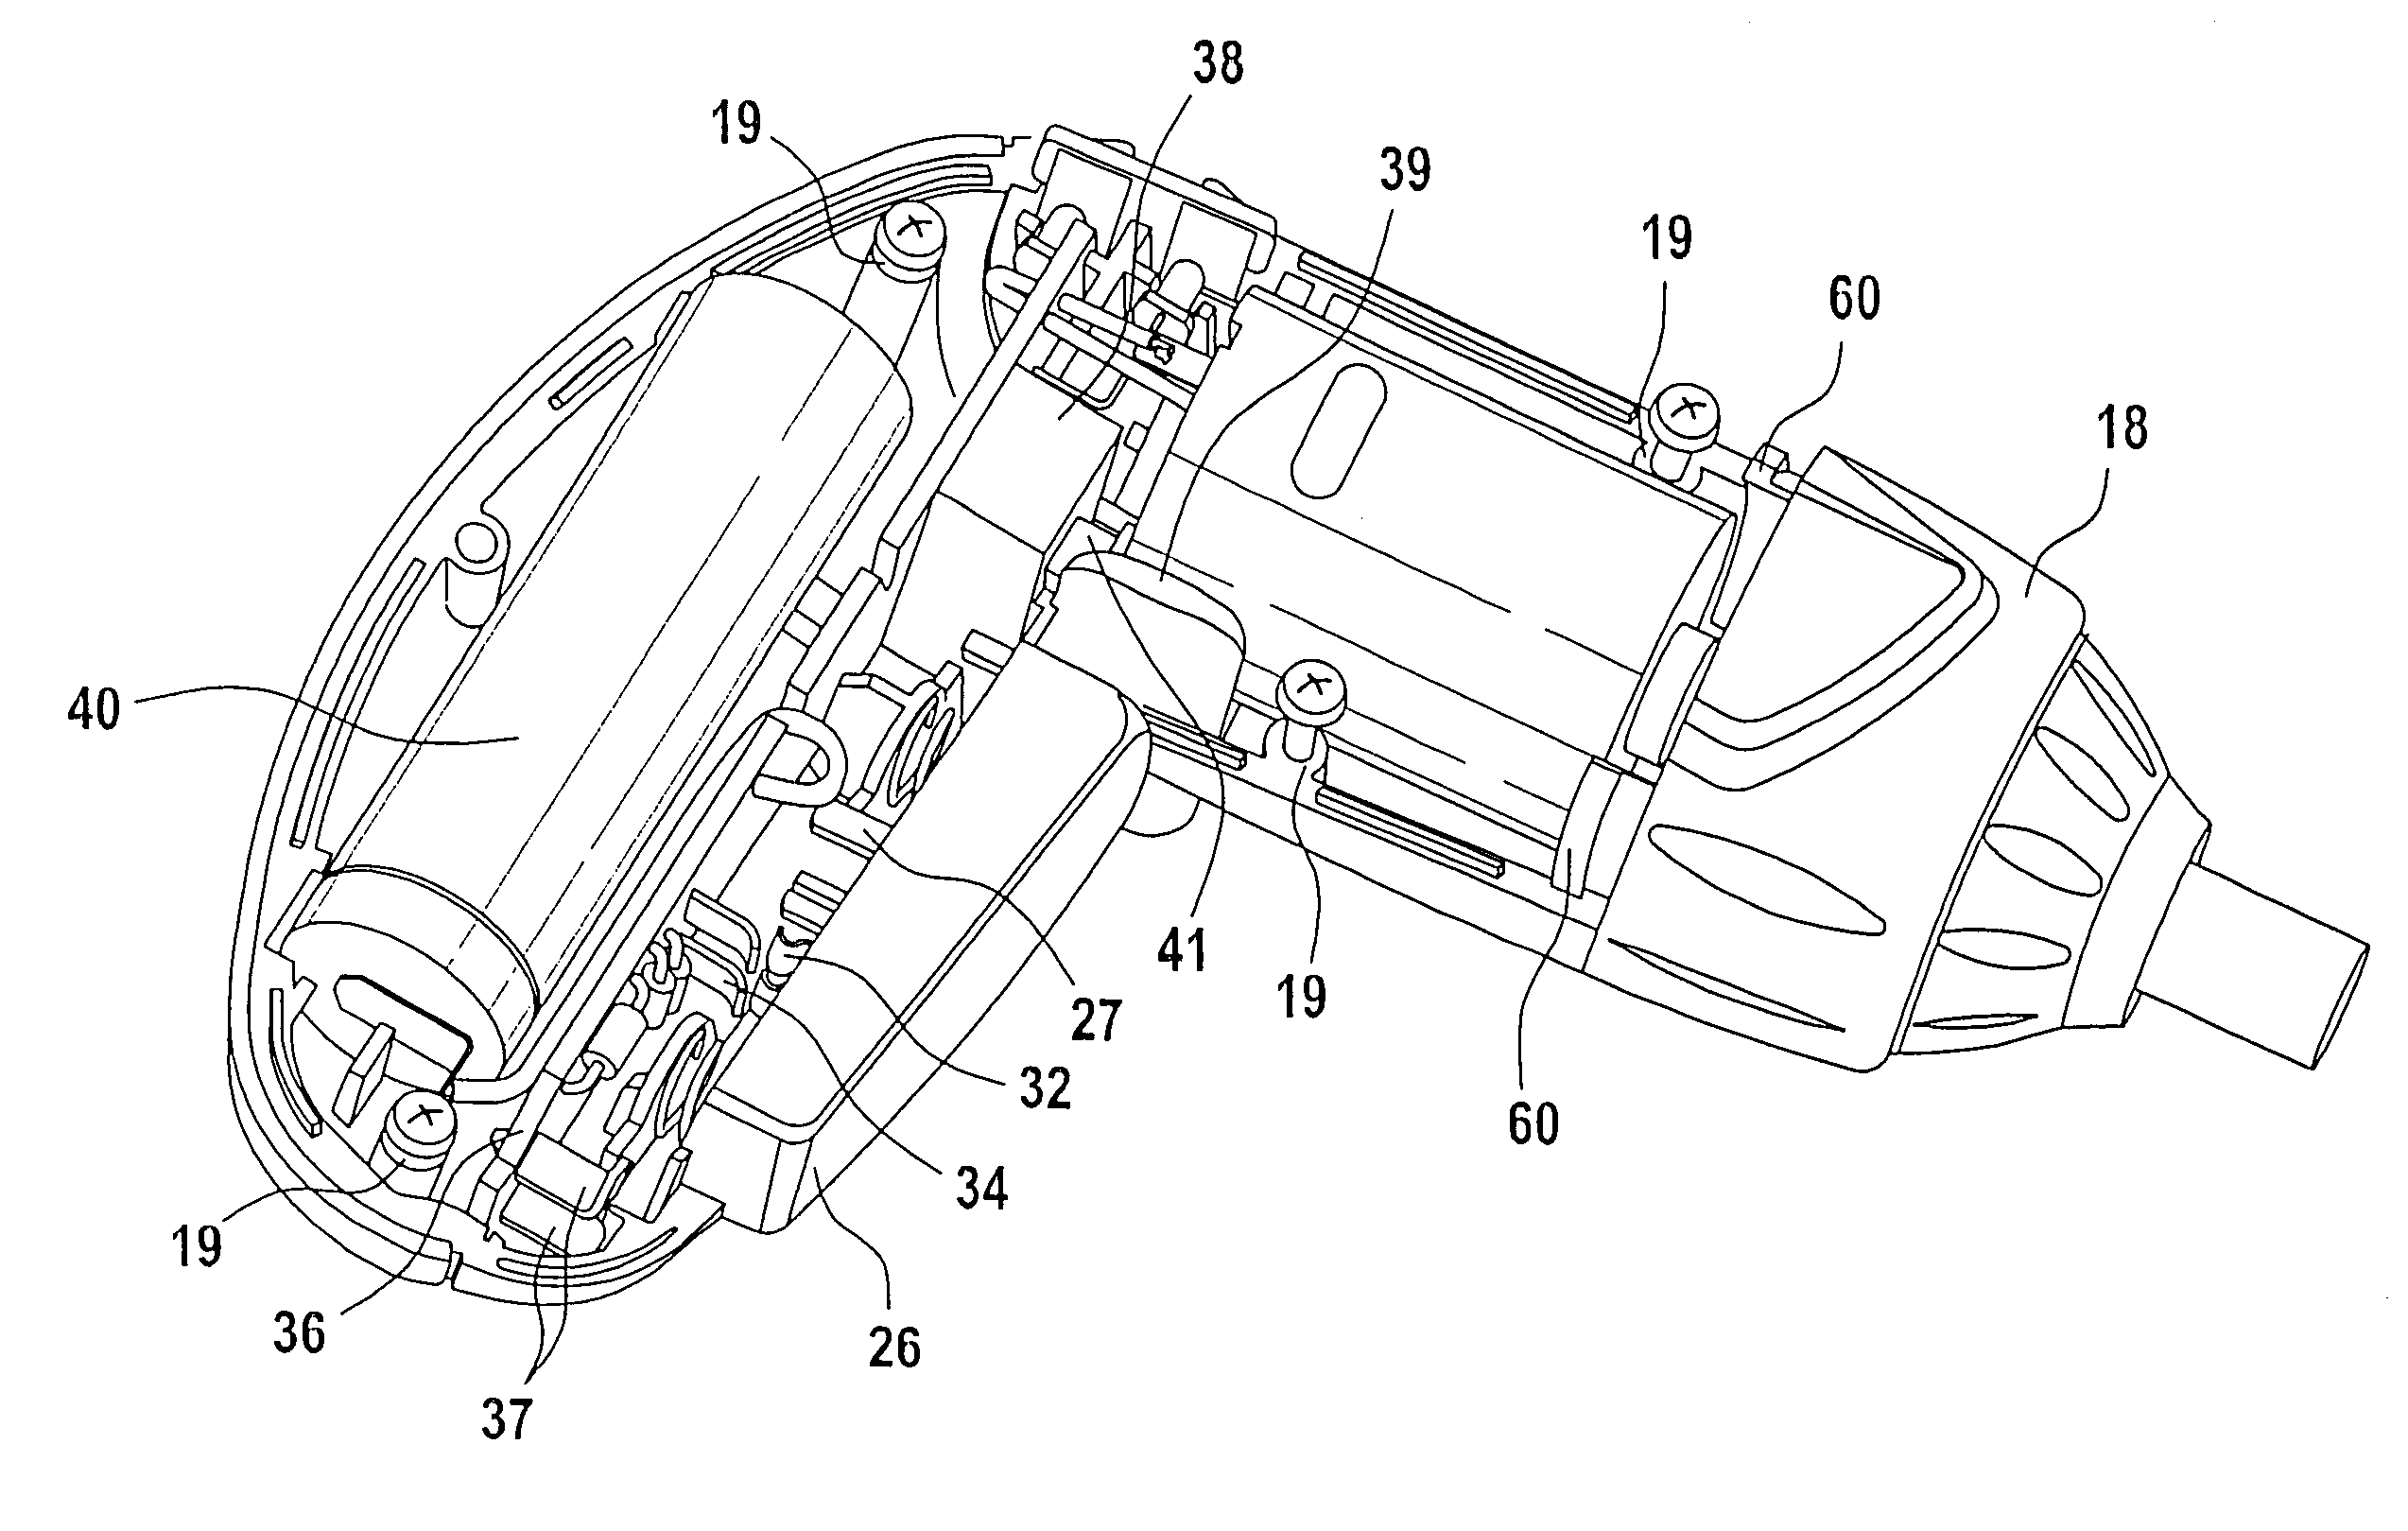 Battery-driven screwdriver with a two-part motor housing and a separate, flanged gear unit